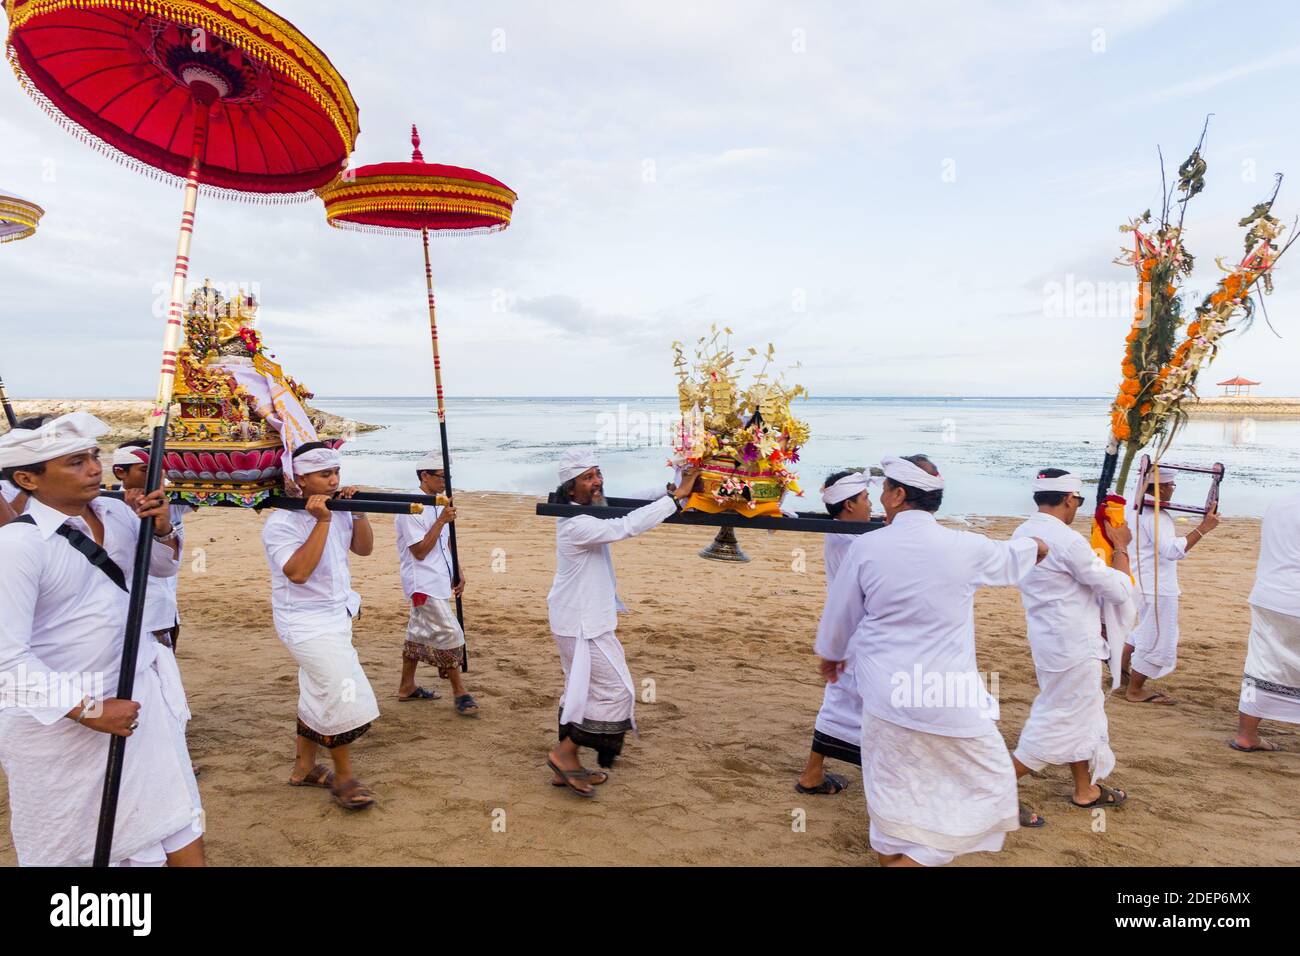 An afternoon Hindu procession at the island of Bali, Indonesia Stock Photo